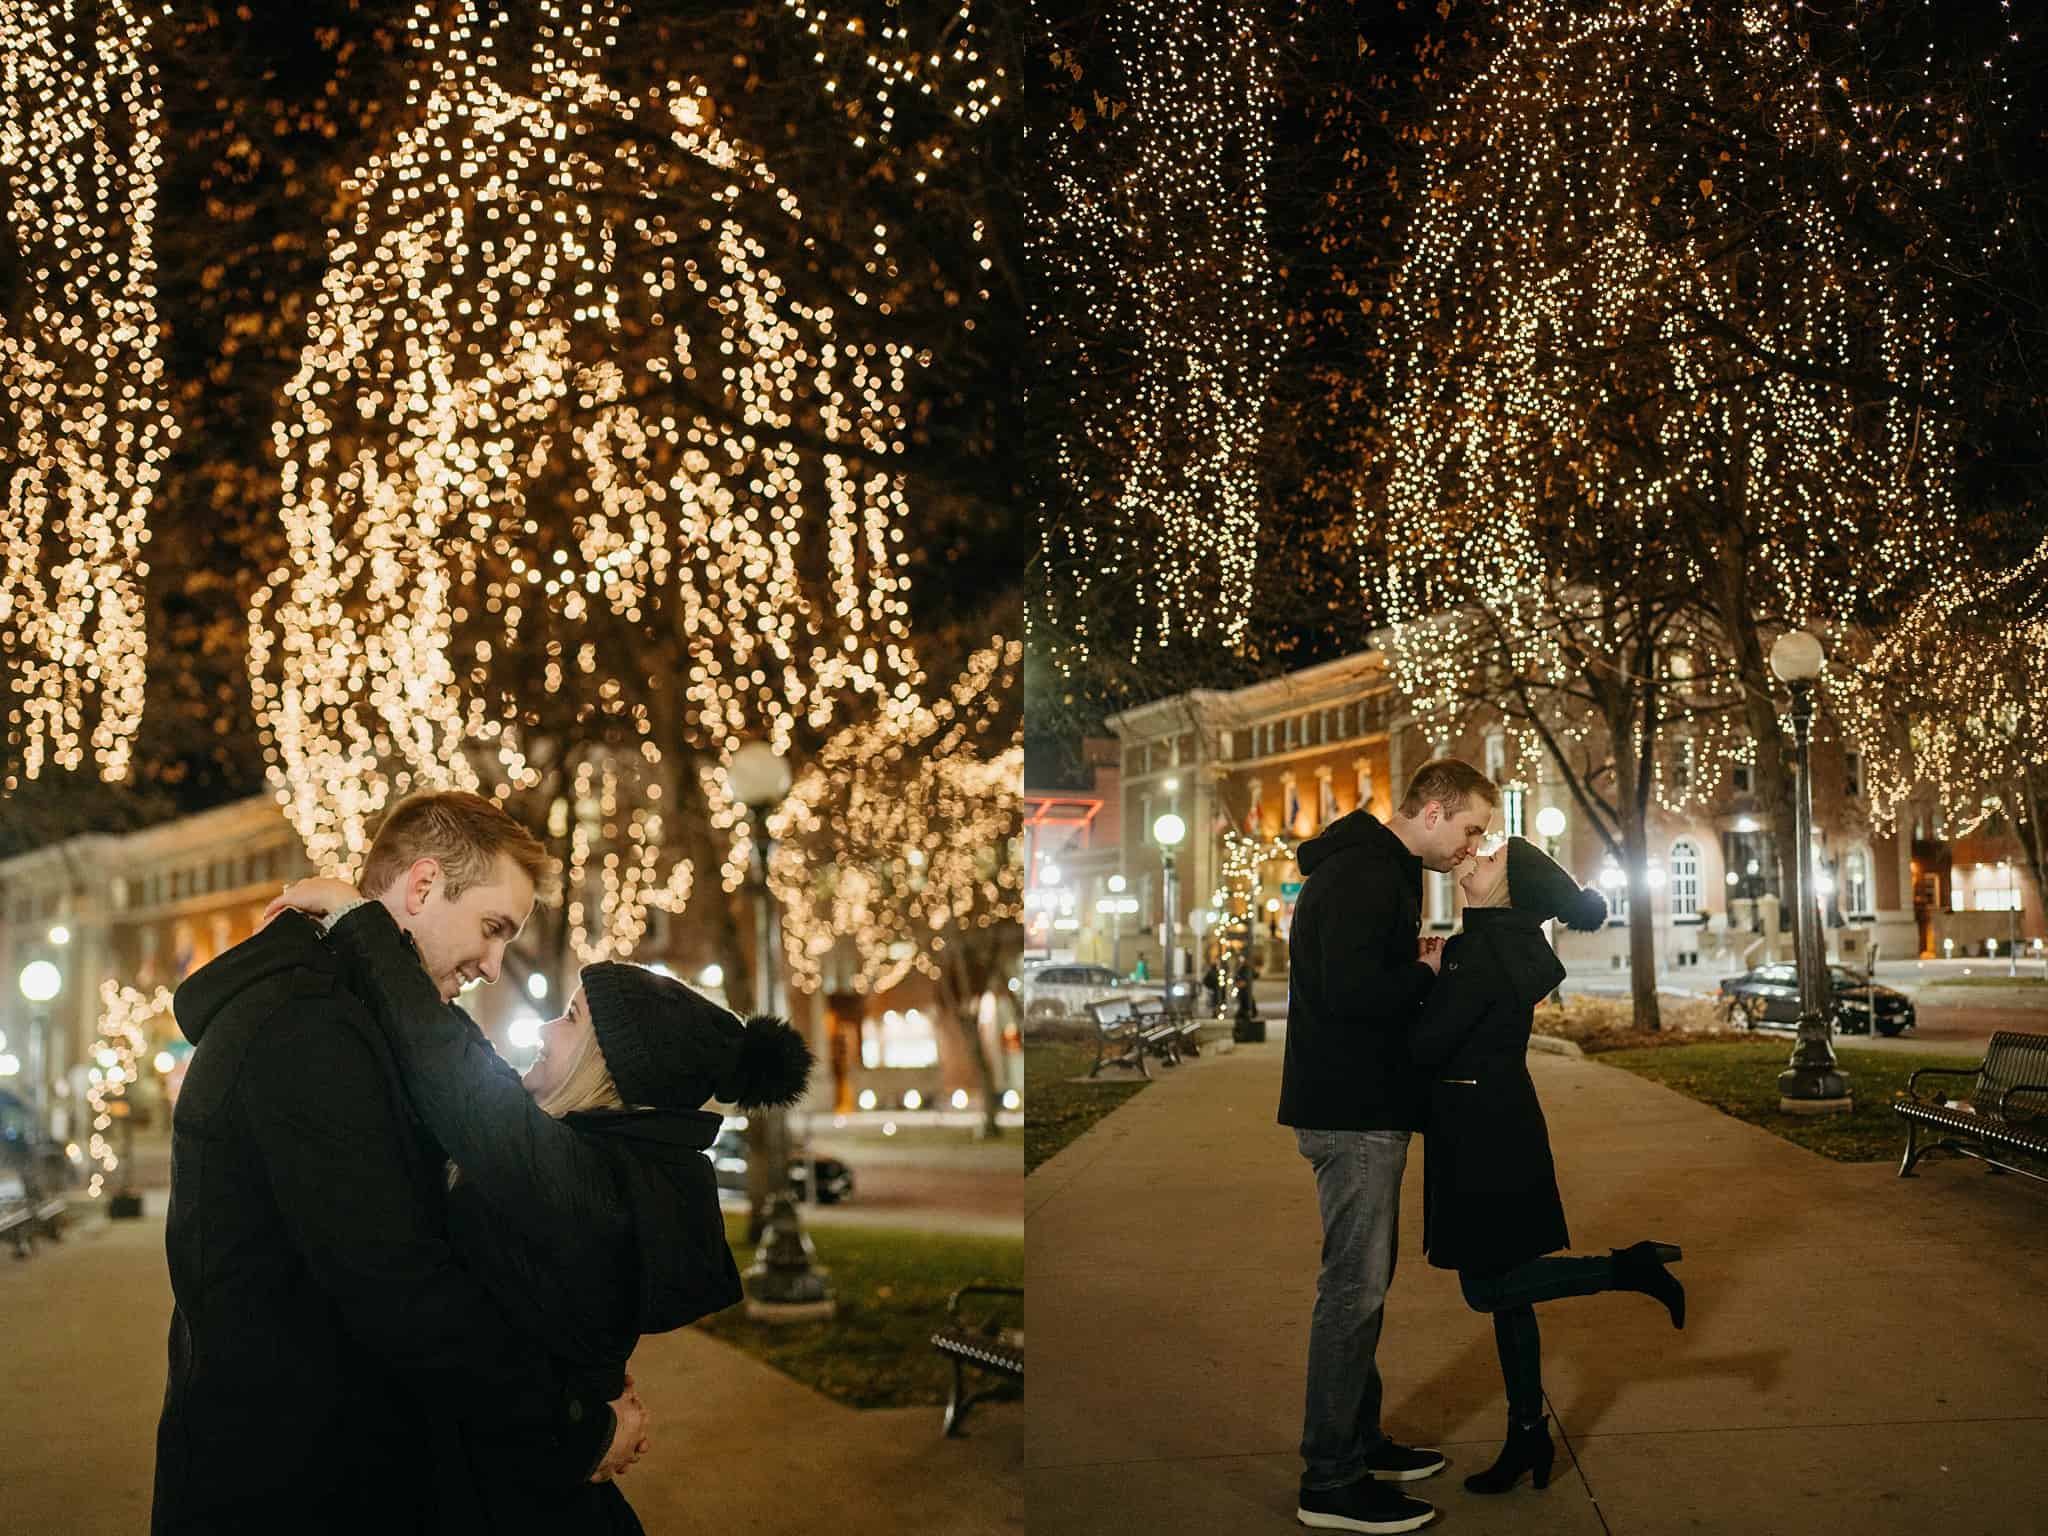 engaged couple kiss under winter lights